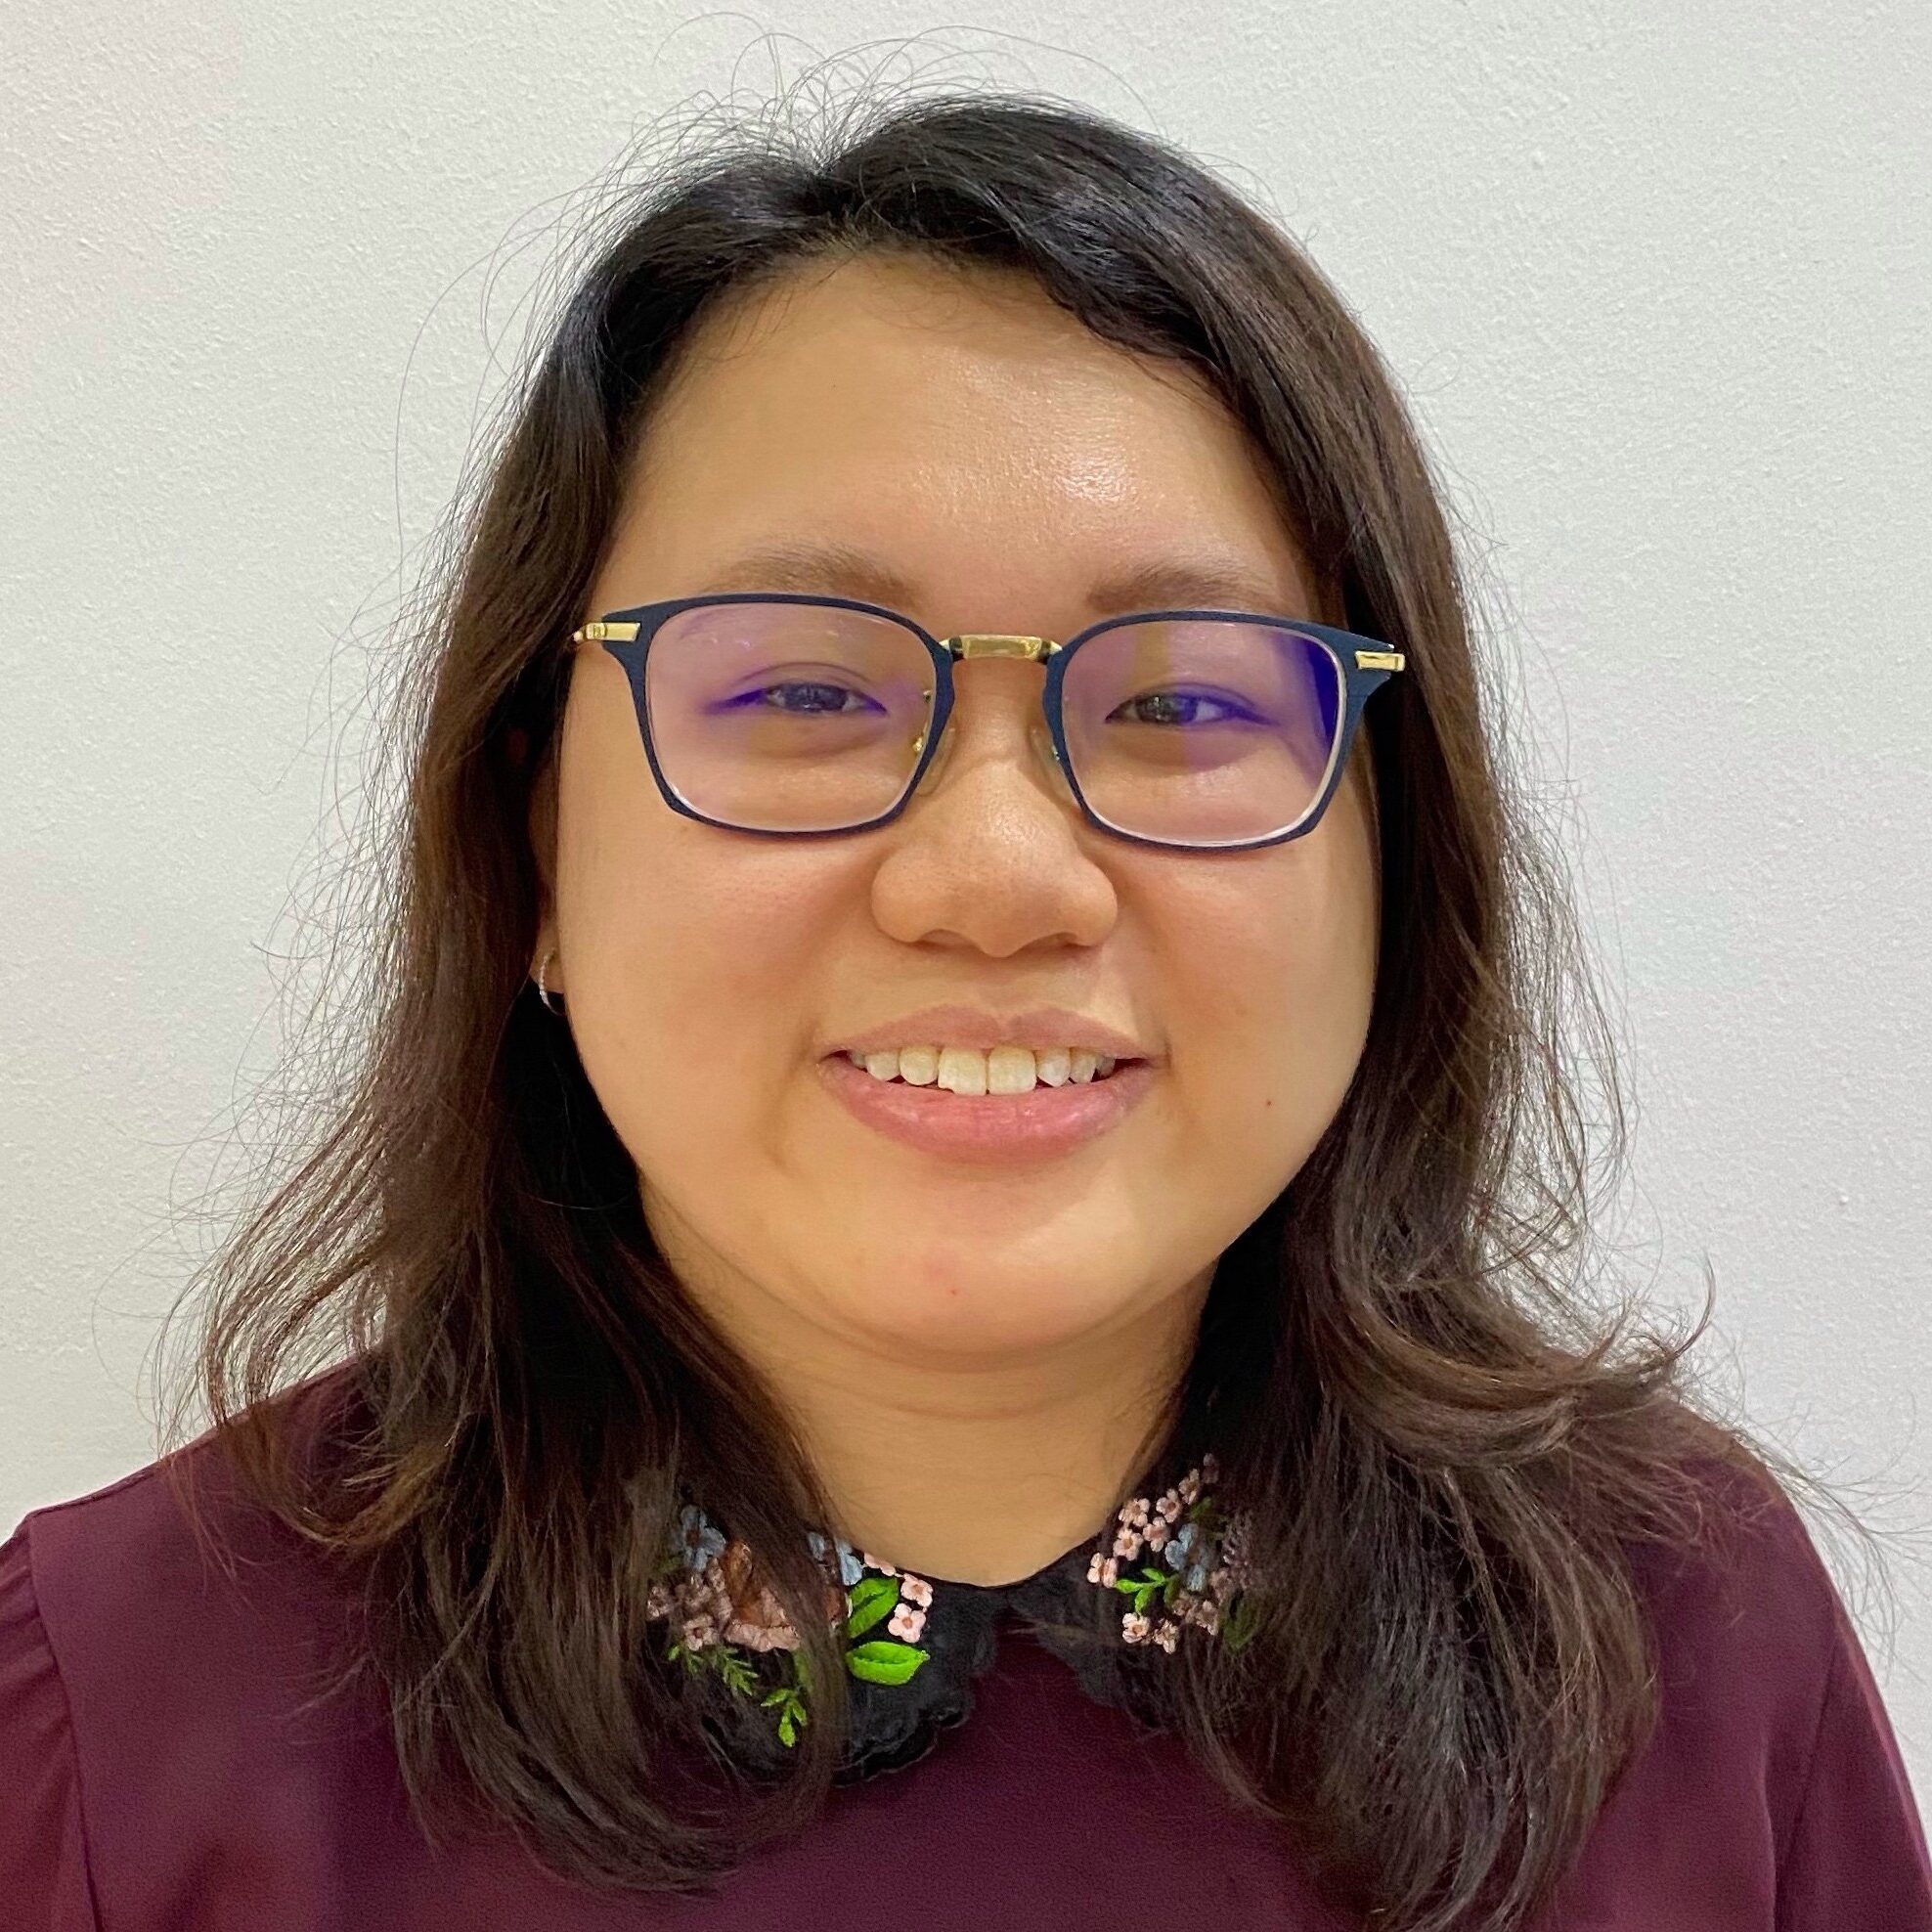 Jae-Mie is a Clinical Psychologist. She conducts diagnostic assessments and screenings for ADHD, Adoption, ASD, Emotional Support Animal, and more.